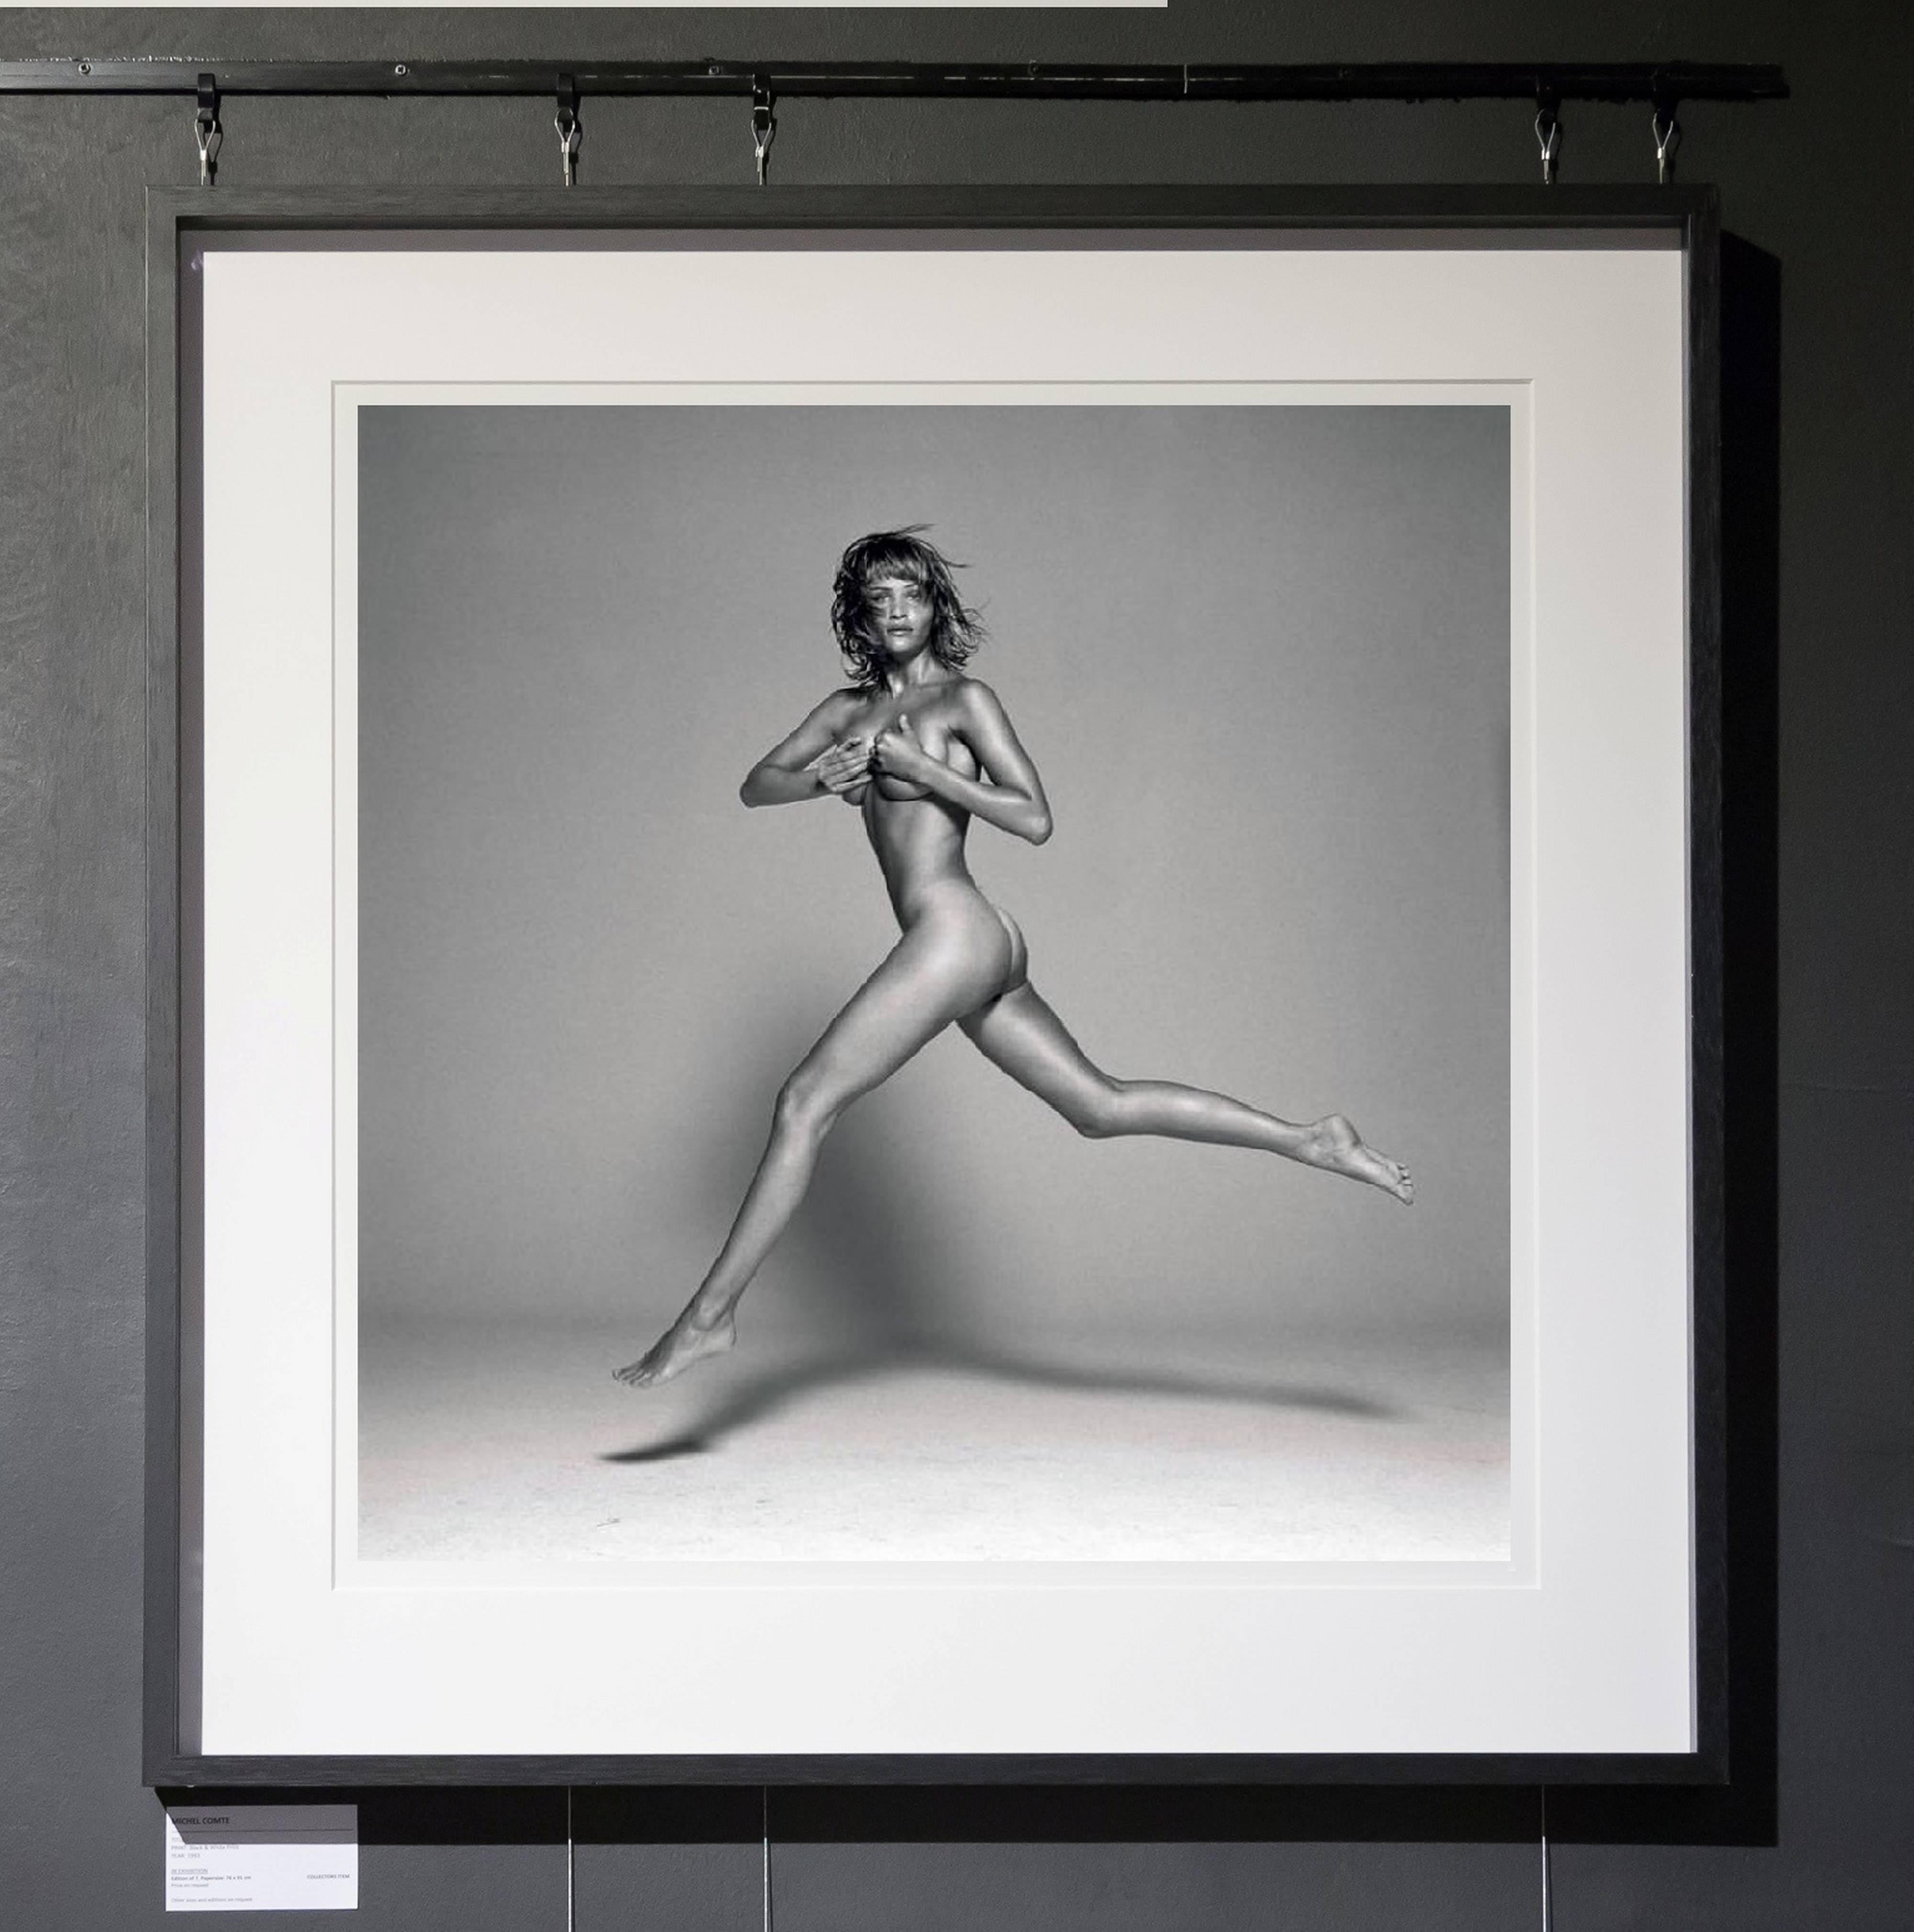 Helena Christensen II - the nude supermodel jumping in the air  - Photograph by Michel Comte